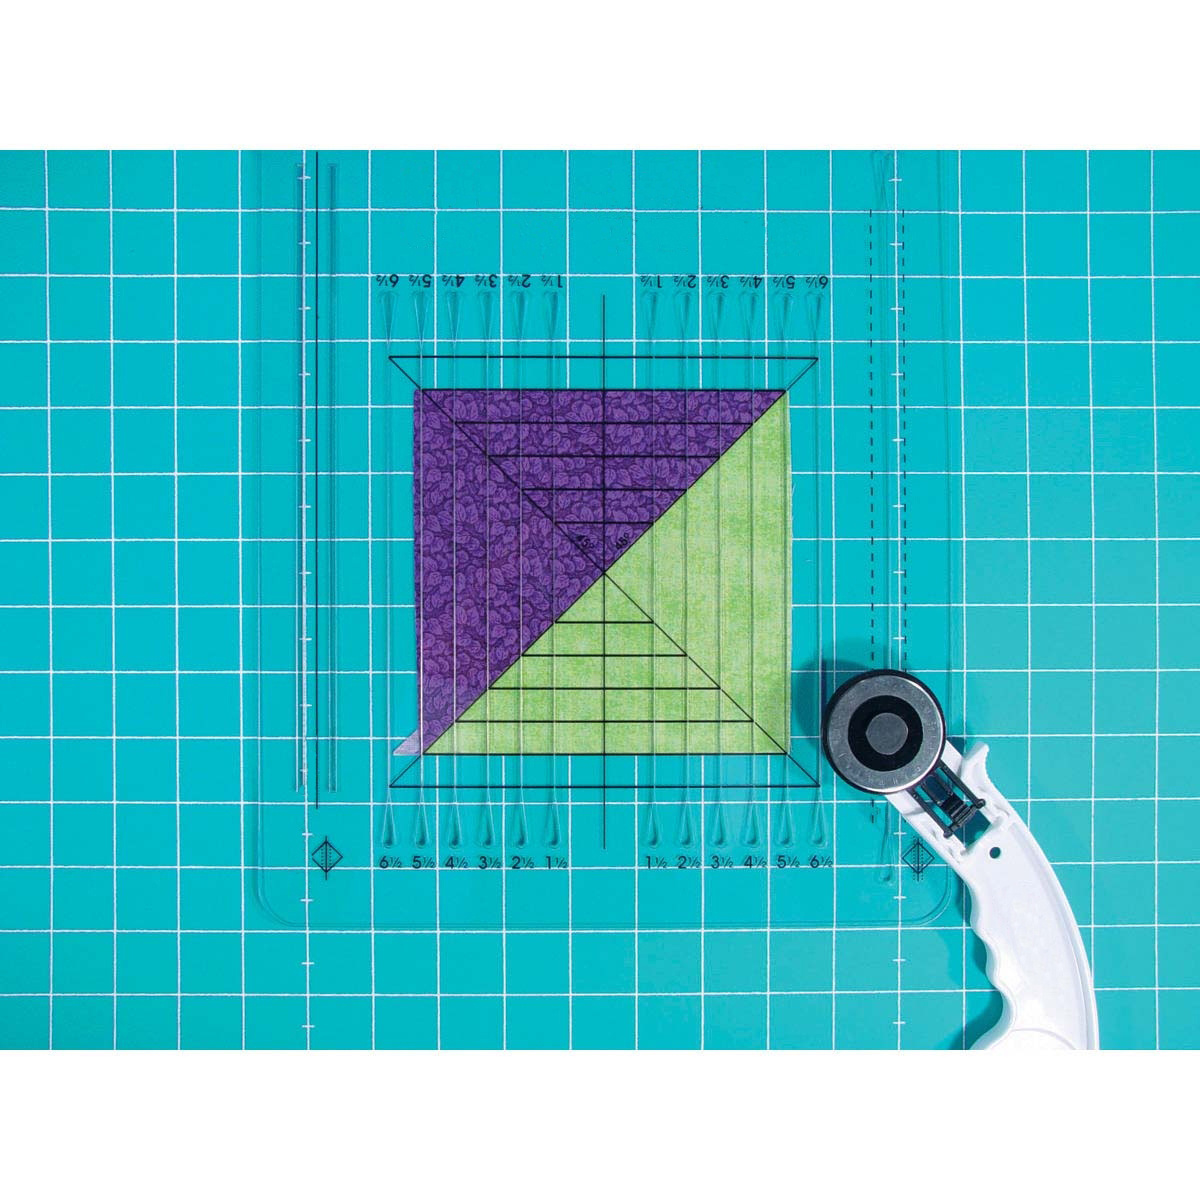 Learn to make perfect Half Square Triangles with this ruler